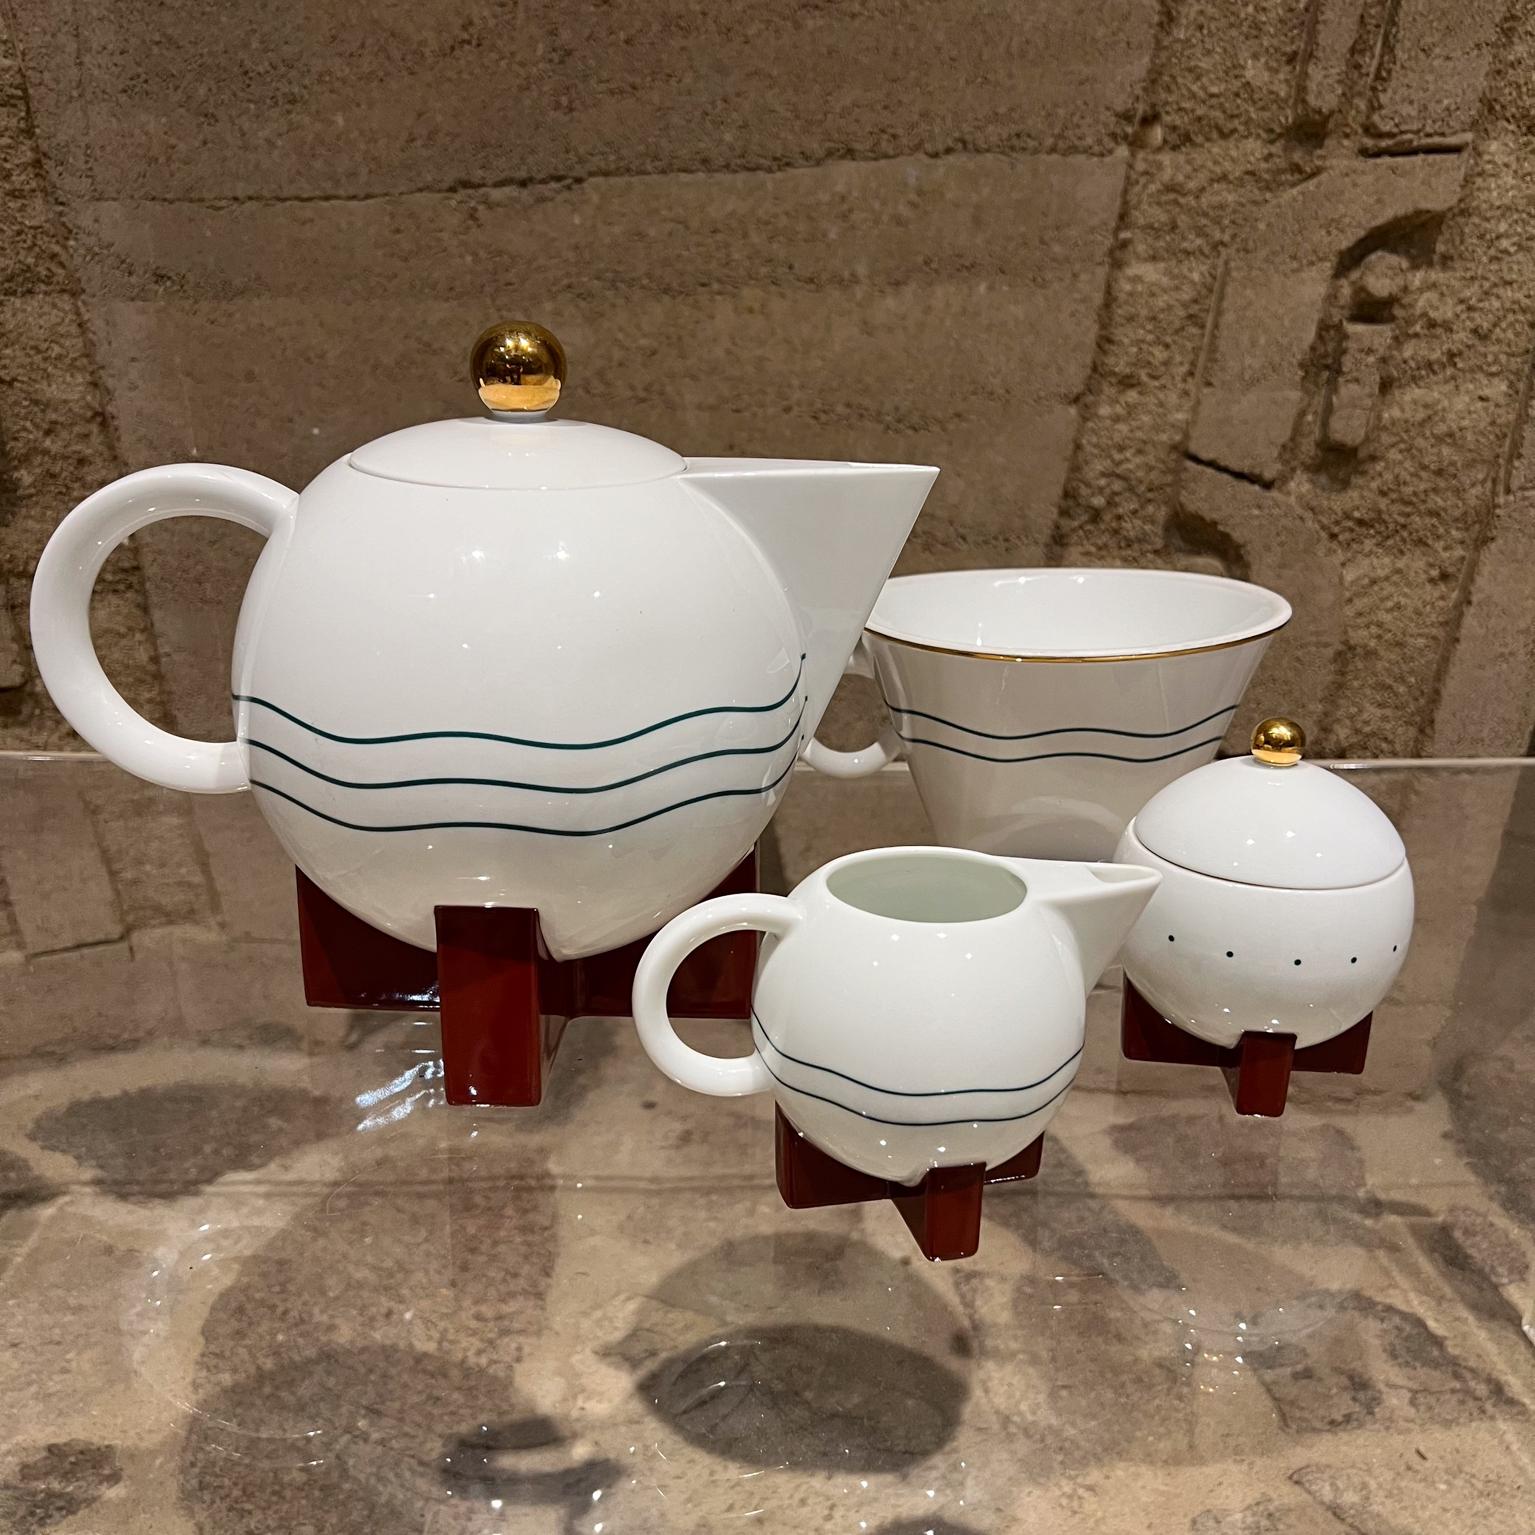 1987 Postmodern Big Dripper Coffee Set by Michael Graves for Swid Powell
High gloss white glaze large pot, filter holder, and lid with gold decoration and brick red base.
Large Coffee Pot 8.75 h x 10.5 d x 7 diameter Coffee filter 4.75 h x 7.5 d x